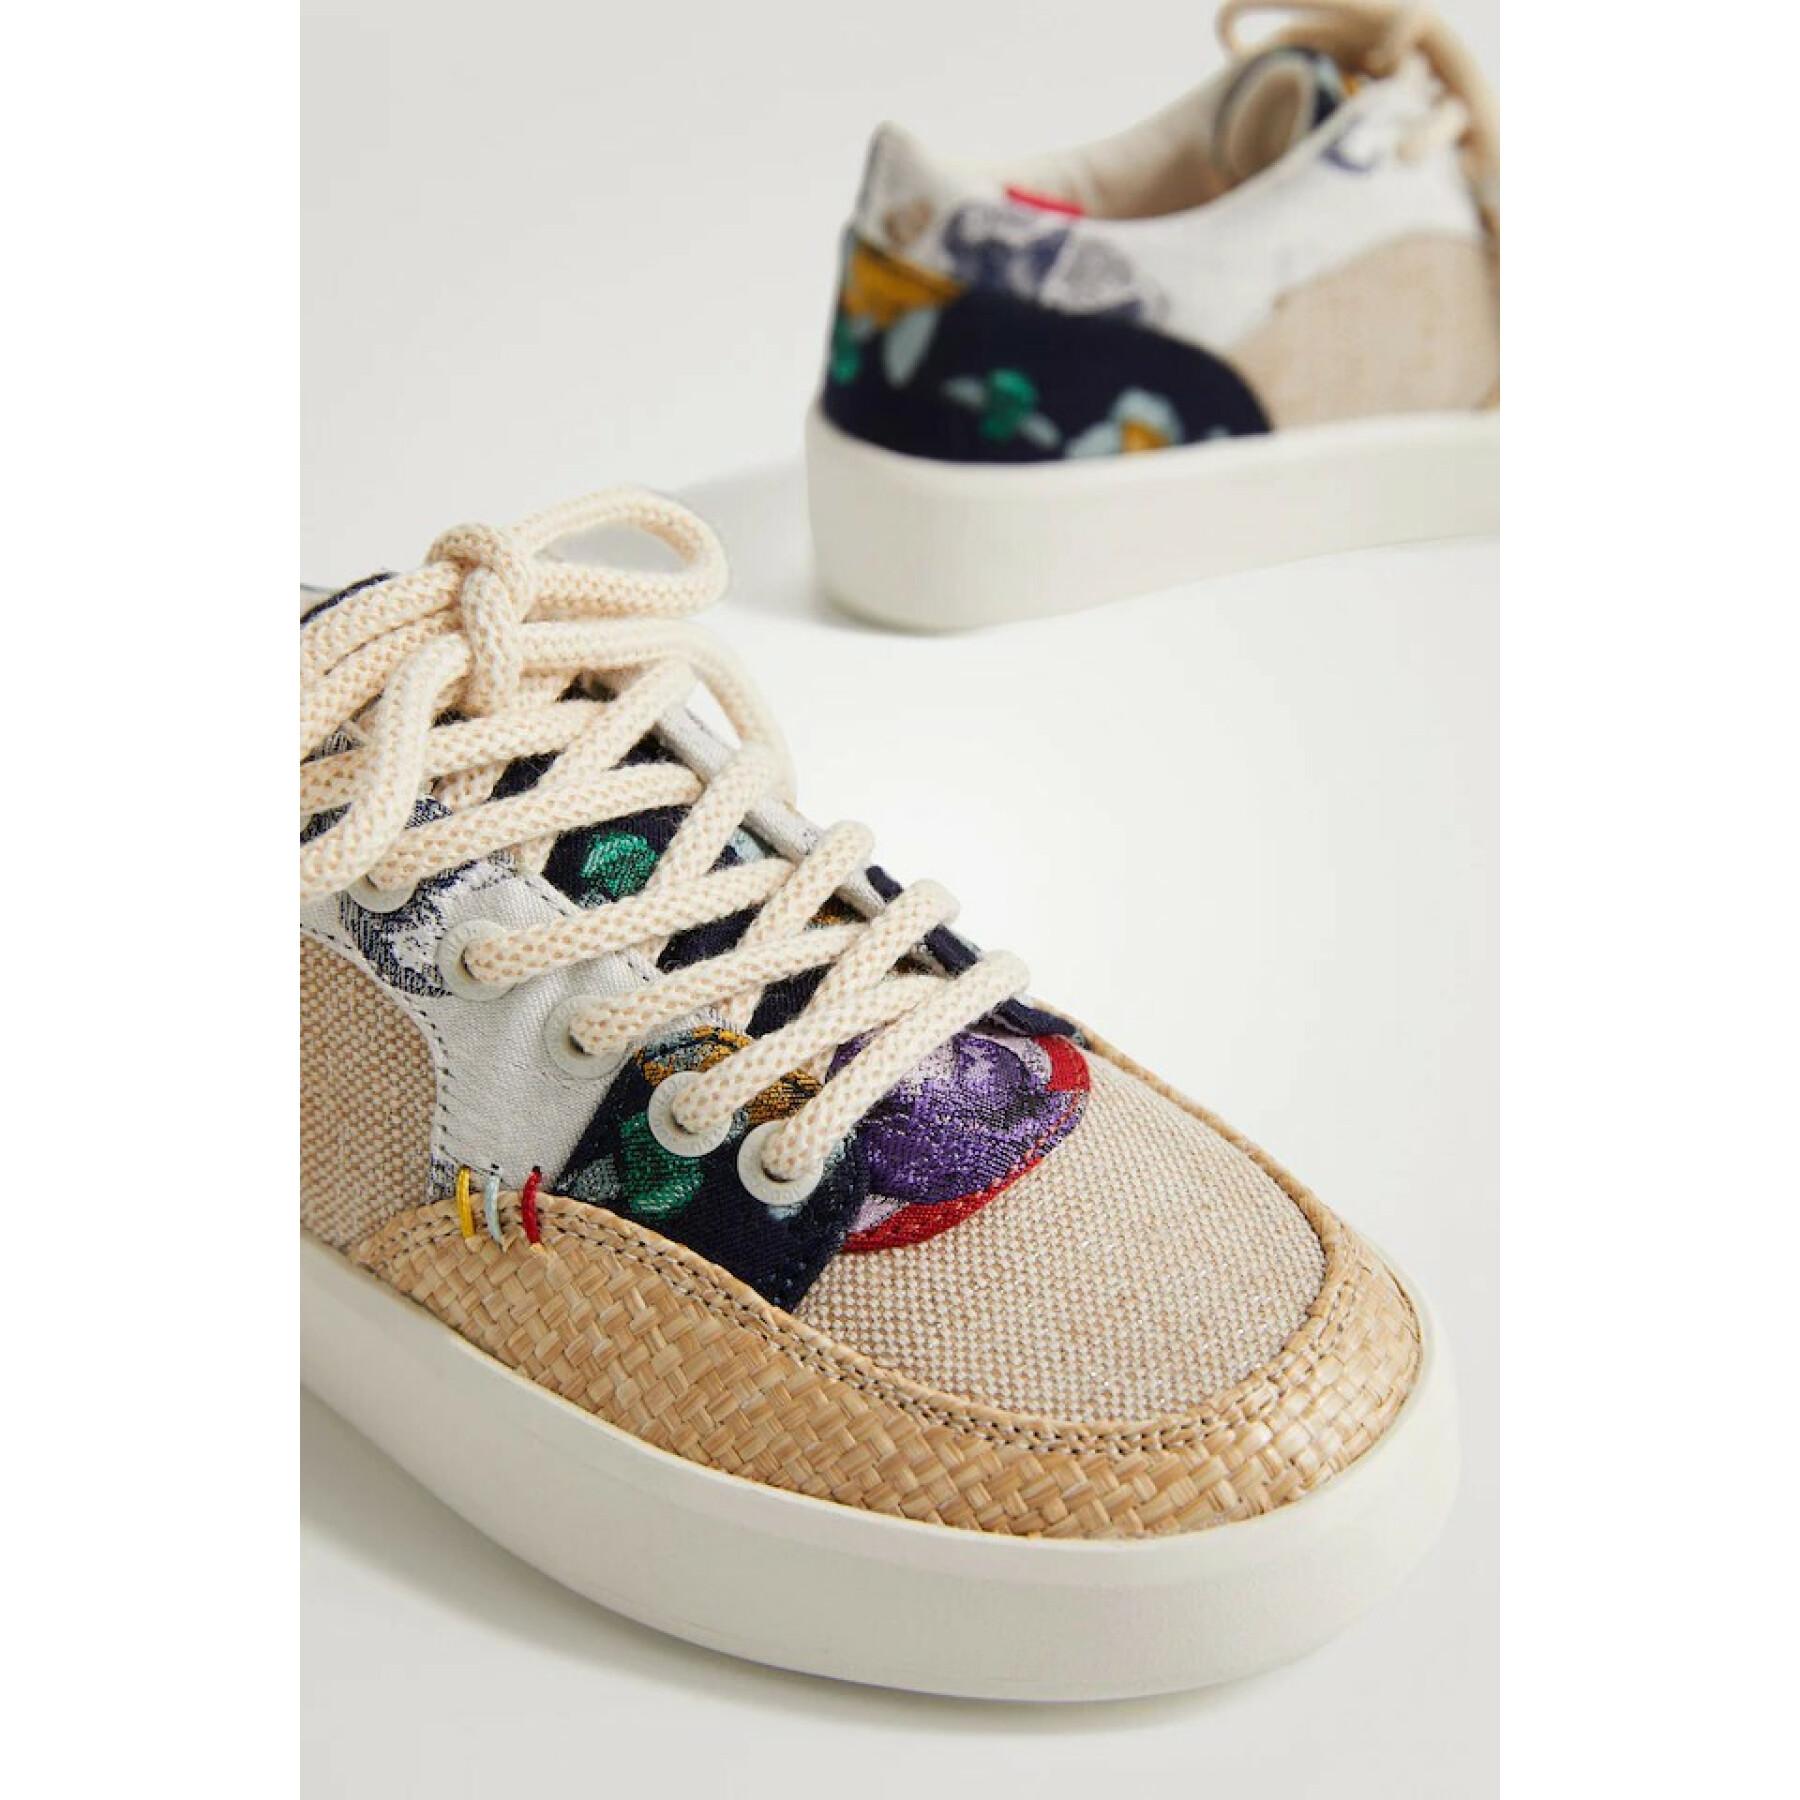 Women's sneakers Desigual Fancy Crafted